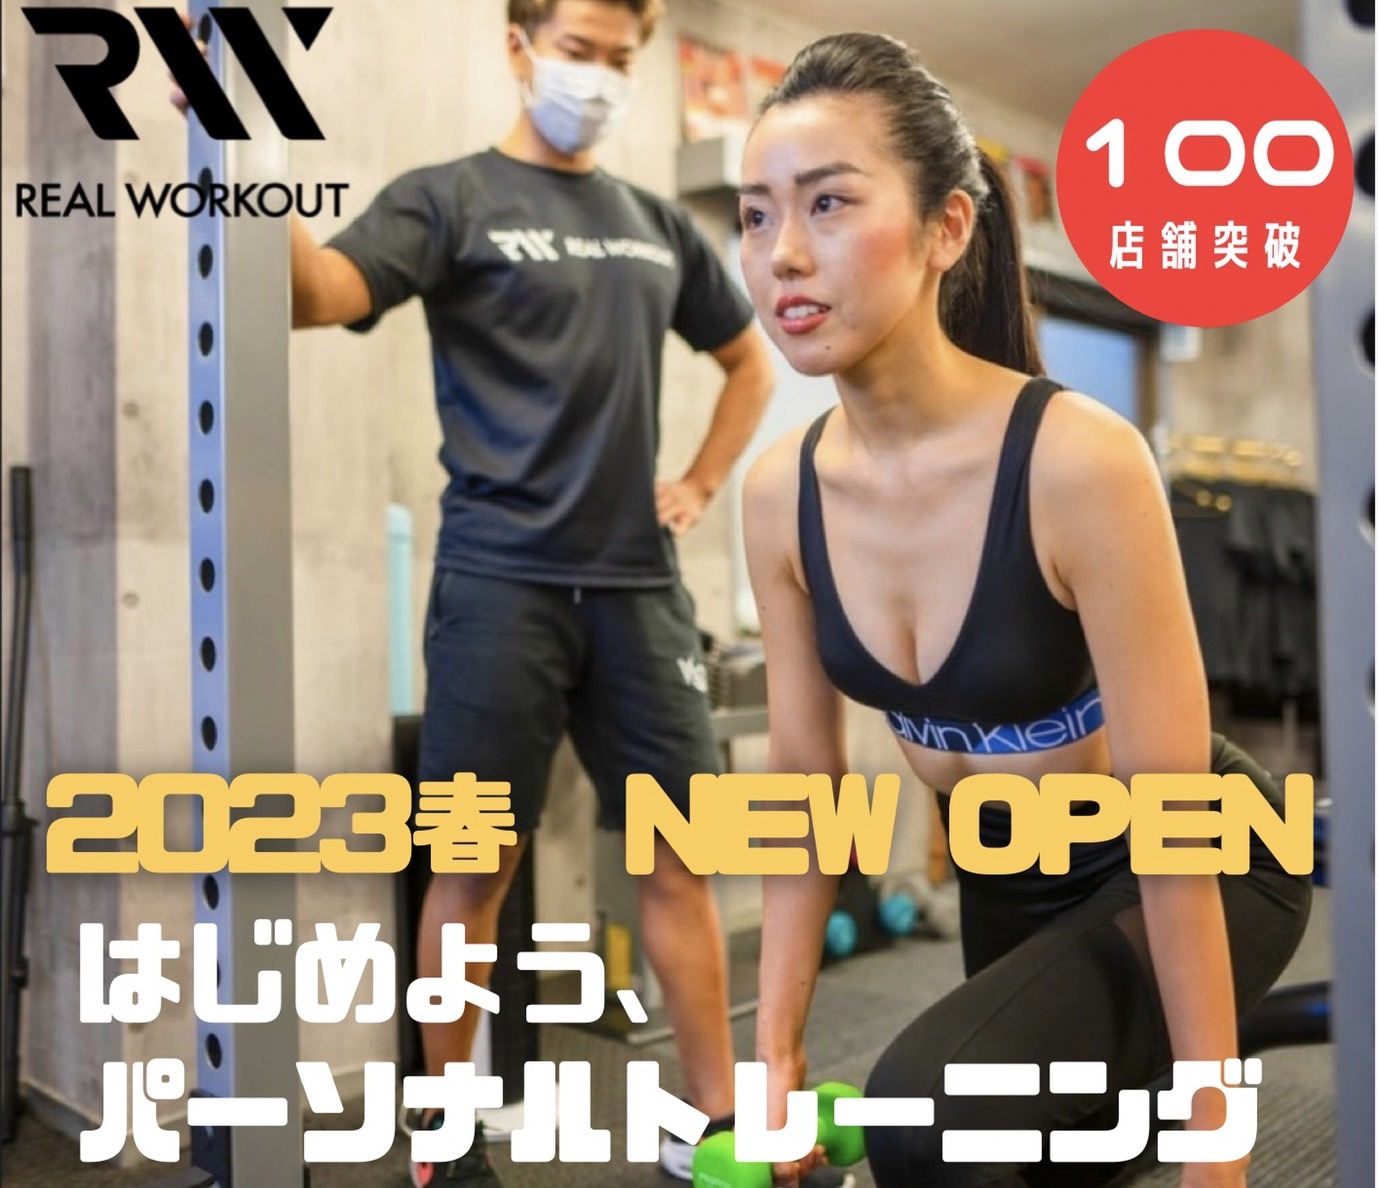 REALWORKOUT 押上店